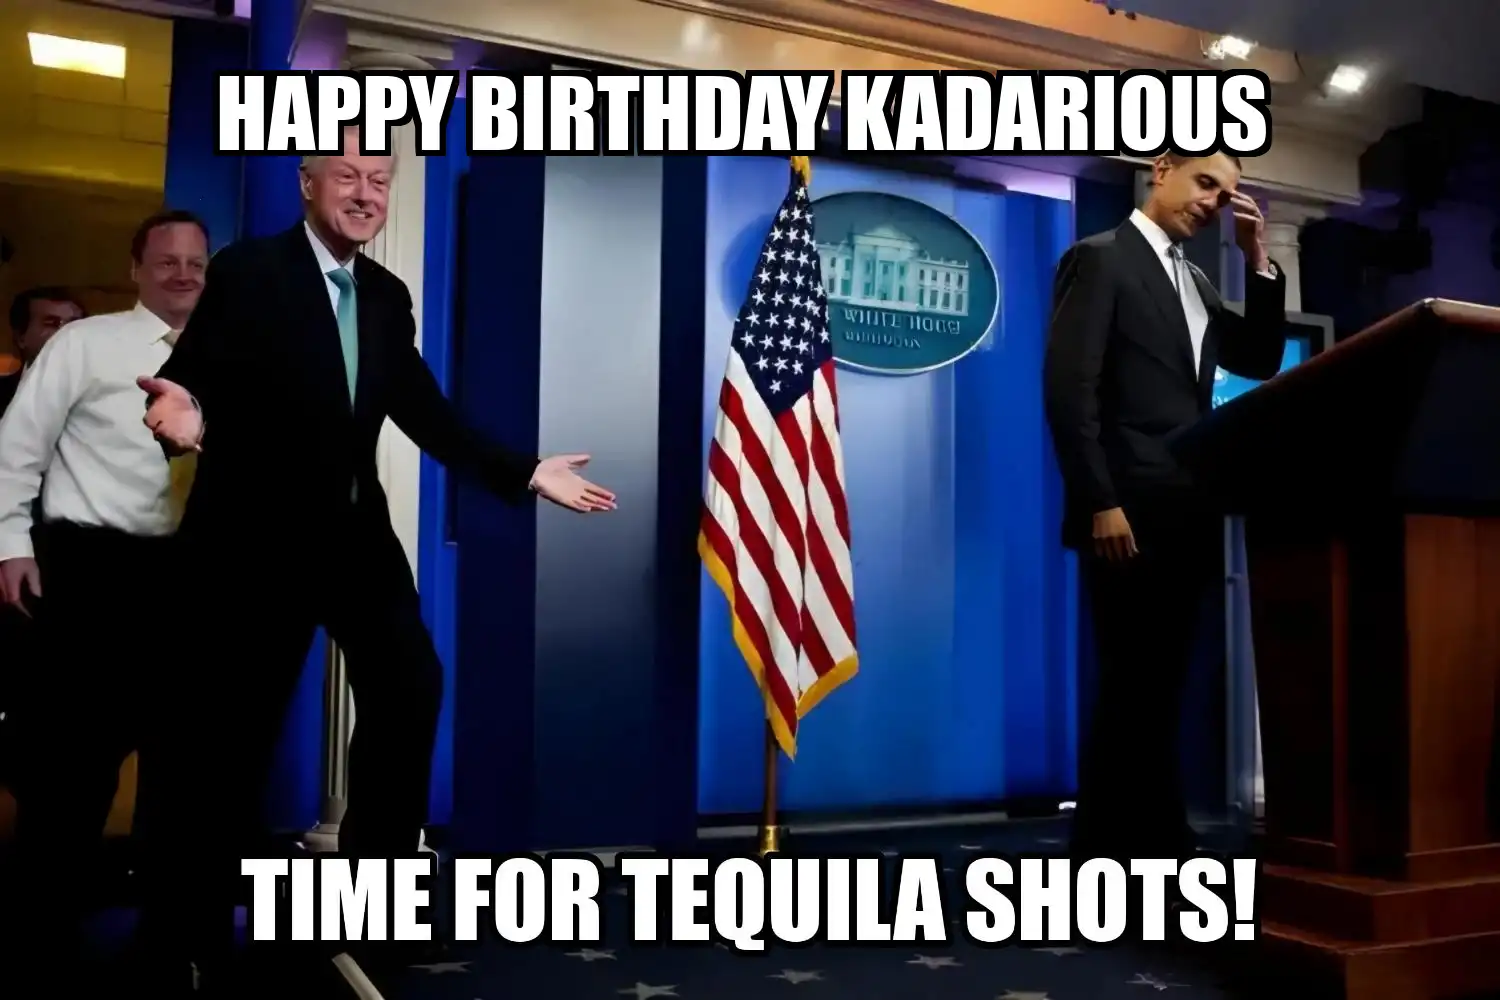 Happy Birthday Kadarious Time For Tequila Shots Memes